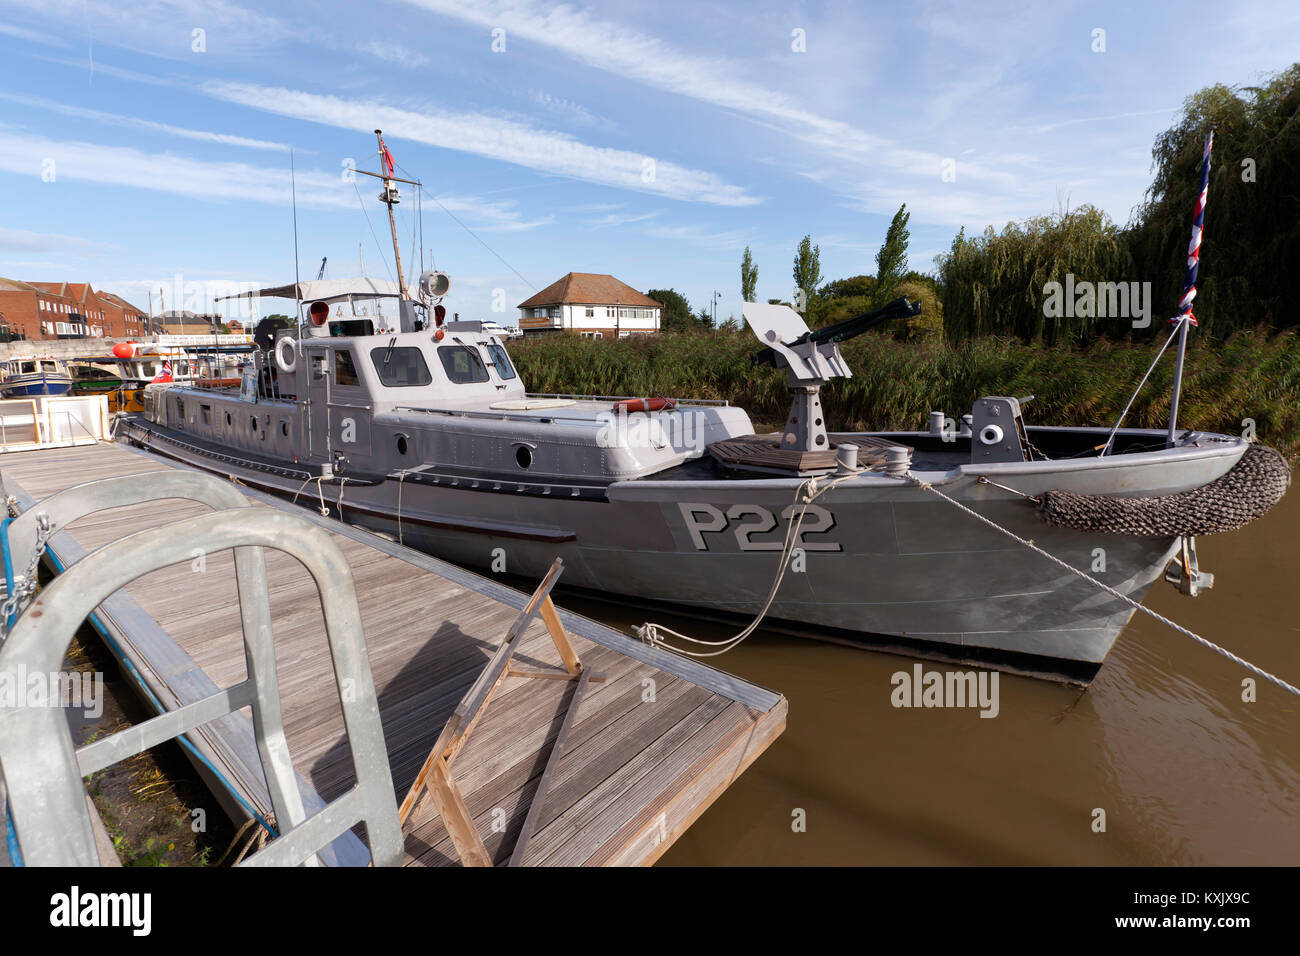 USN P22 (Rhine Maiden)  Gunboat  moored at the Quay, Sandwich Kent Stock Photo